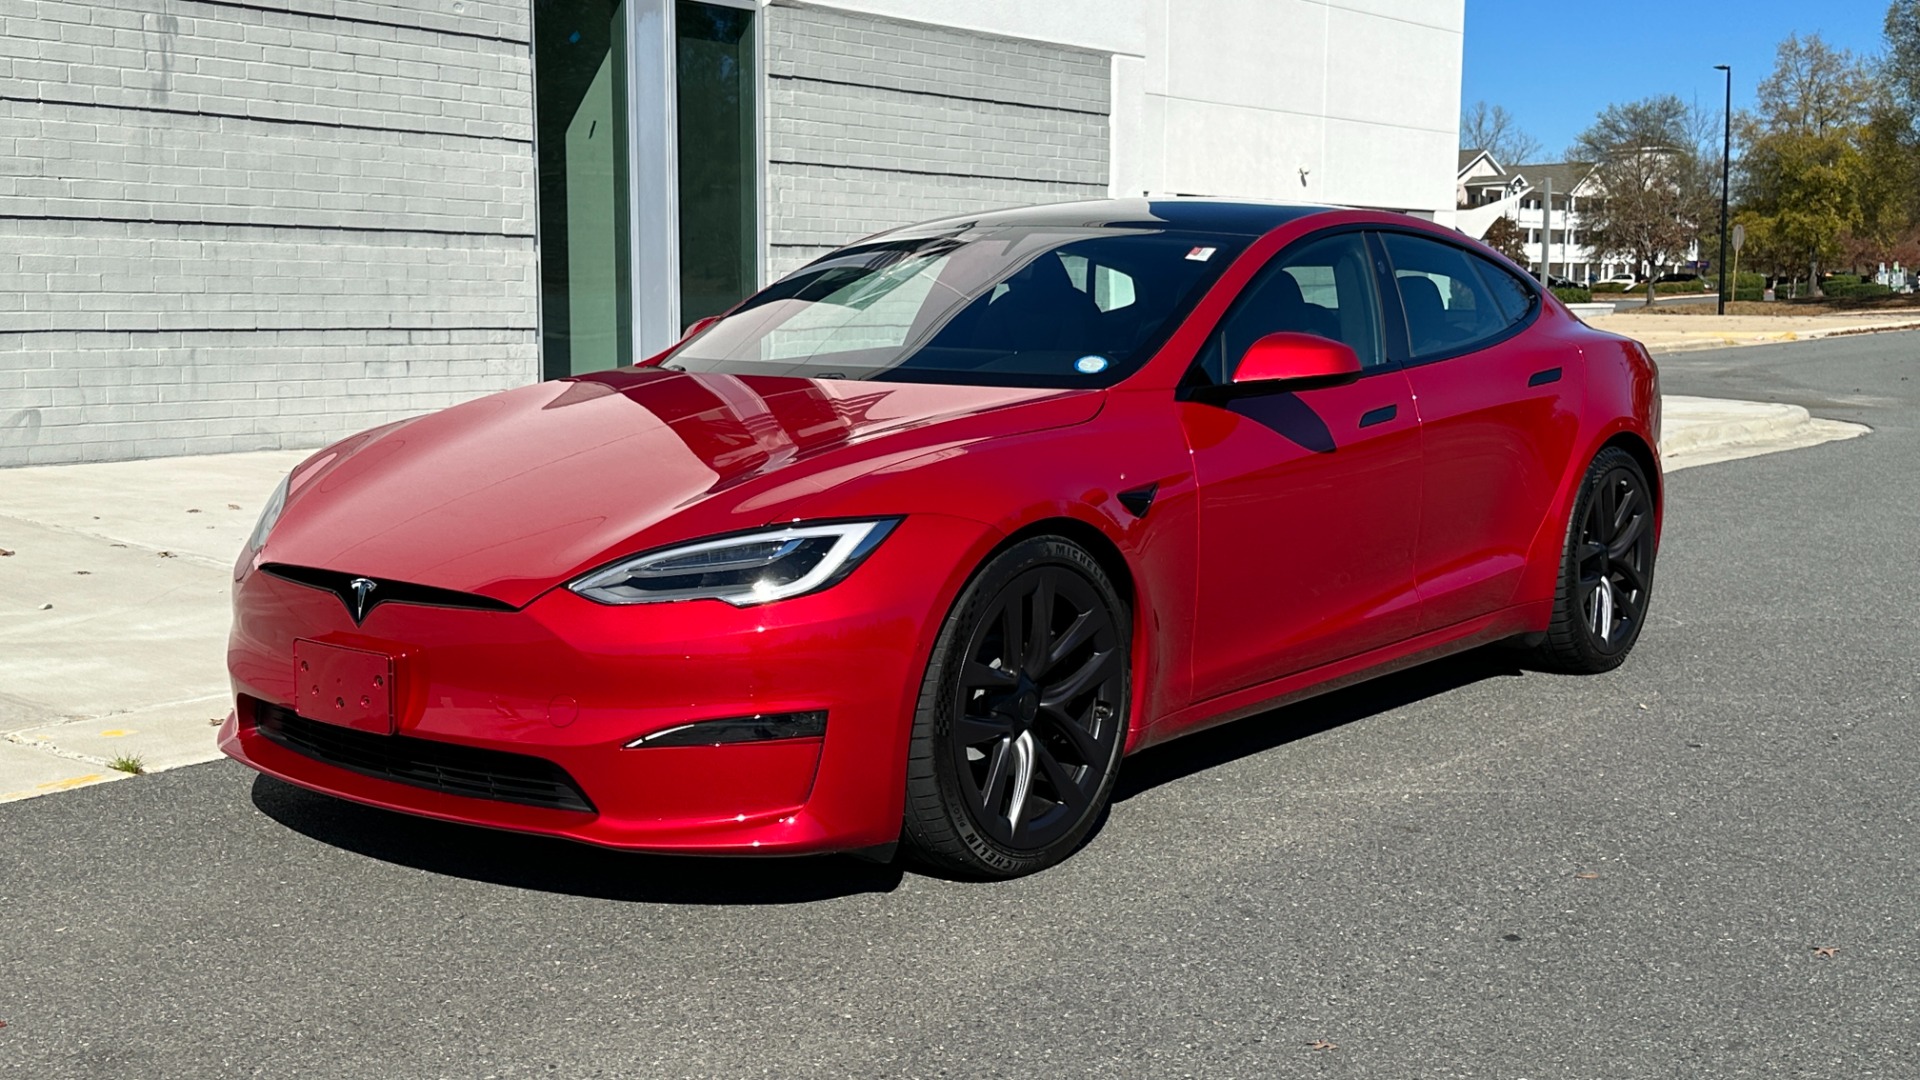 Used 2021 Tesla Model S PLAID / FULL SELF DRIVING / STANDARD CONNECTIVITY / CHARING CABLE / CARBON  for sale $117,995 at Formula Imports in Charlotte NC 28227 6